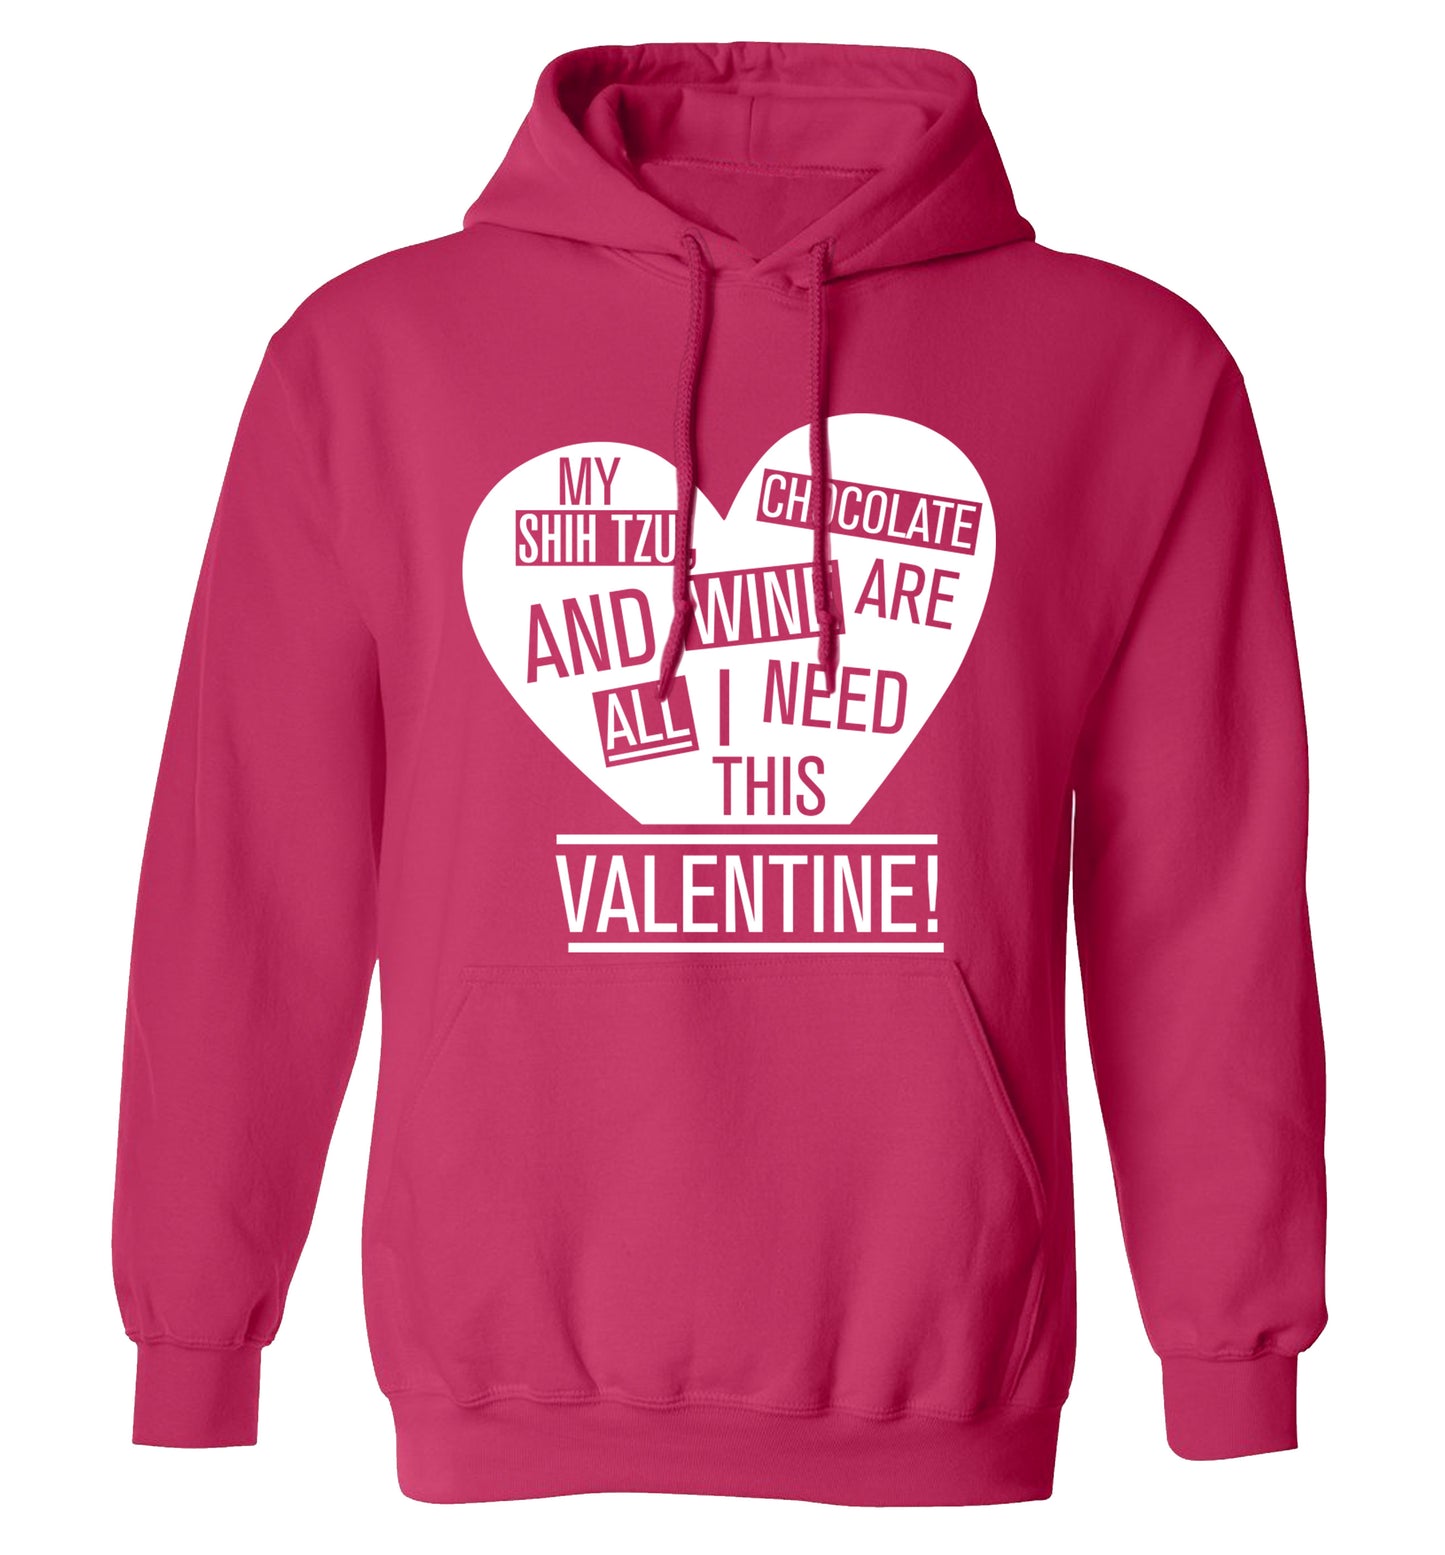 My shih tzu, chocolate and wine are all I need this valentine! adults unisex pink hoodie 2XL